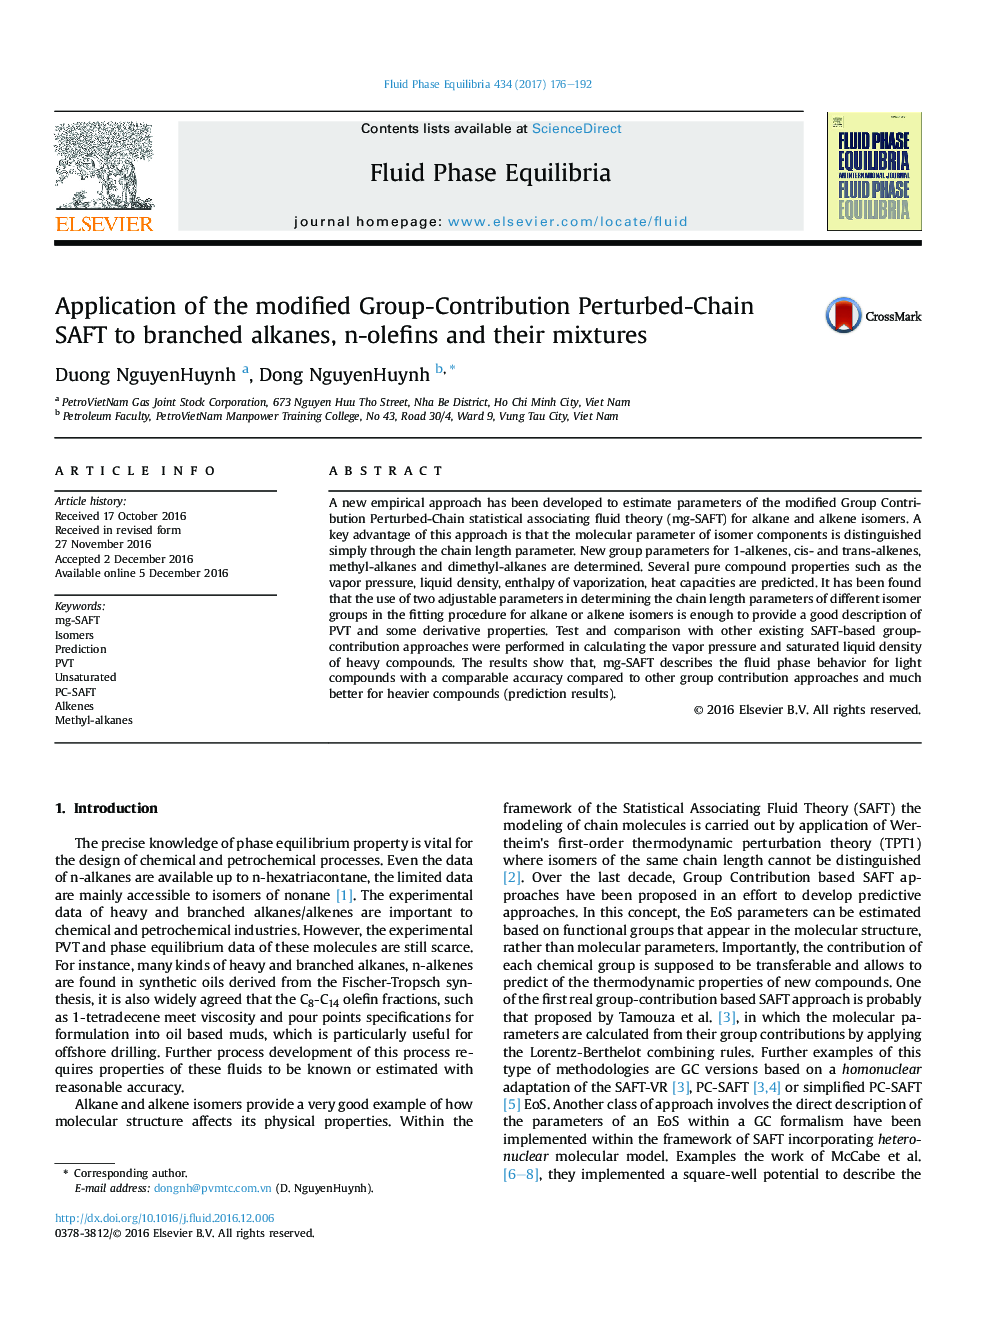 Application of the modified Group-Contribution Perturbed-Chain SAFT to branched alkanes, n-olefins and their mixtures